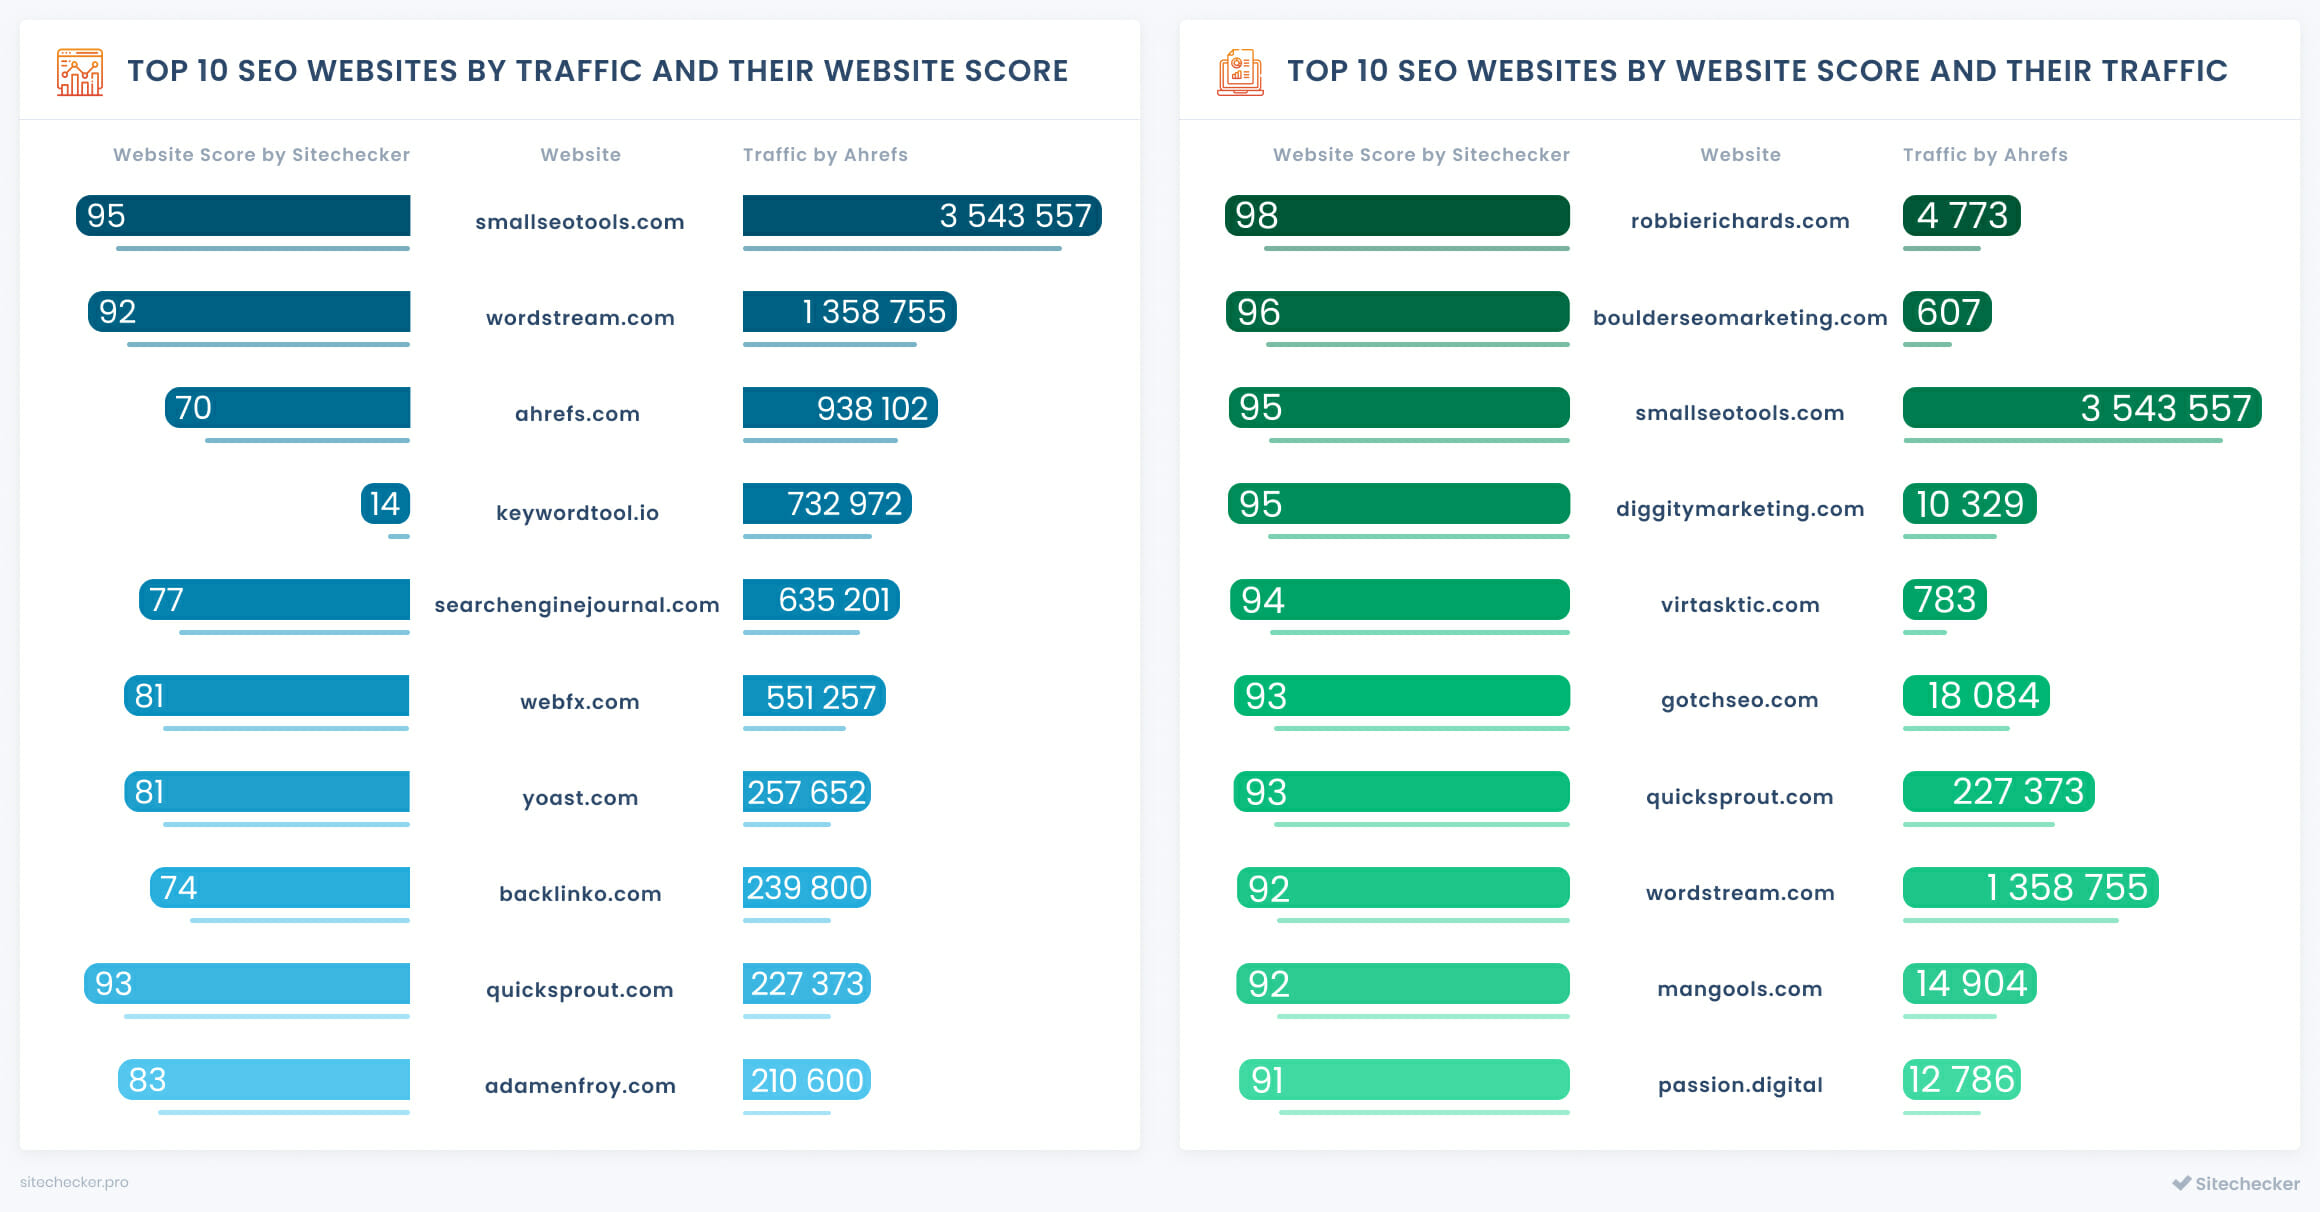 top seo companies by traffic and website score